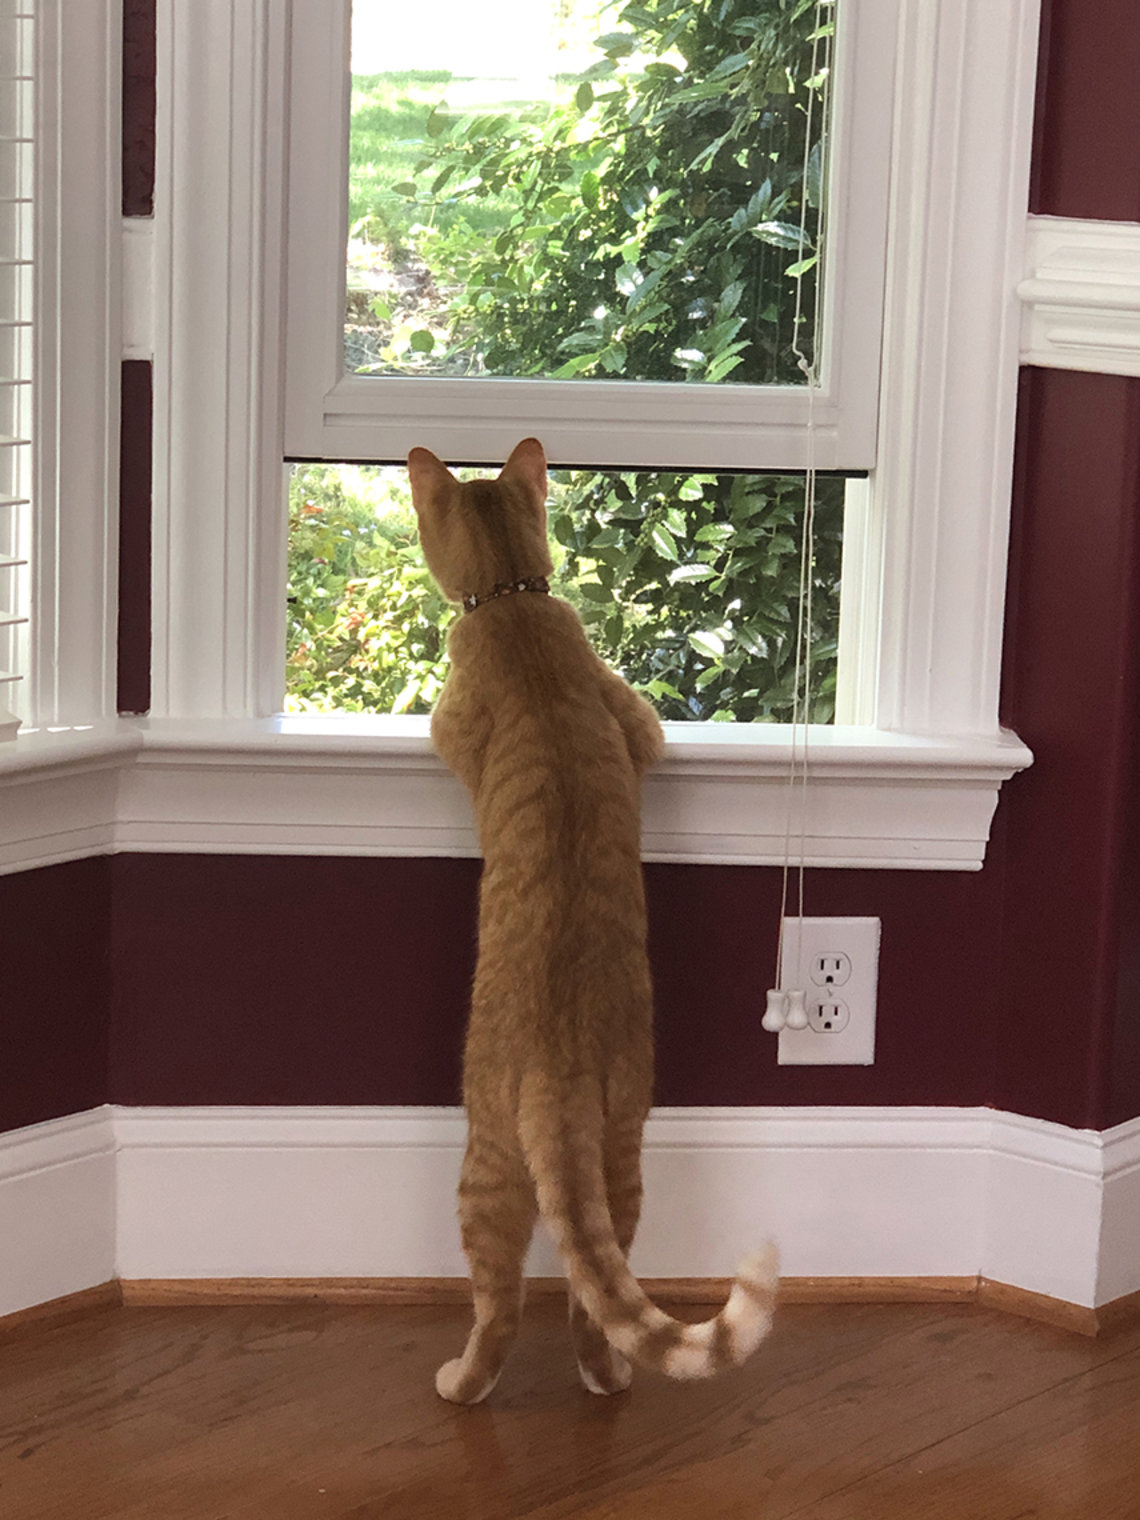 An orange cat stands on hind legs, looking out the open window.